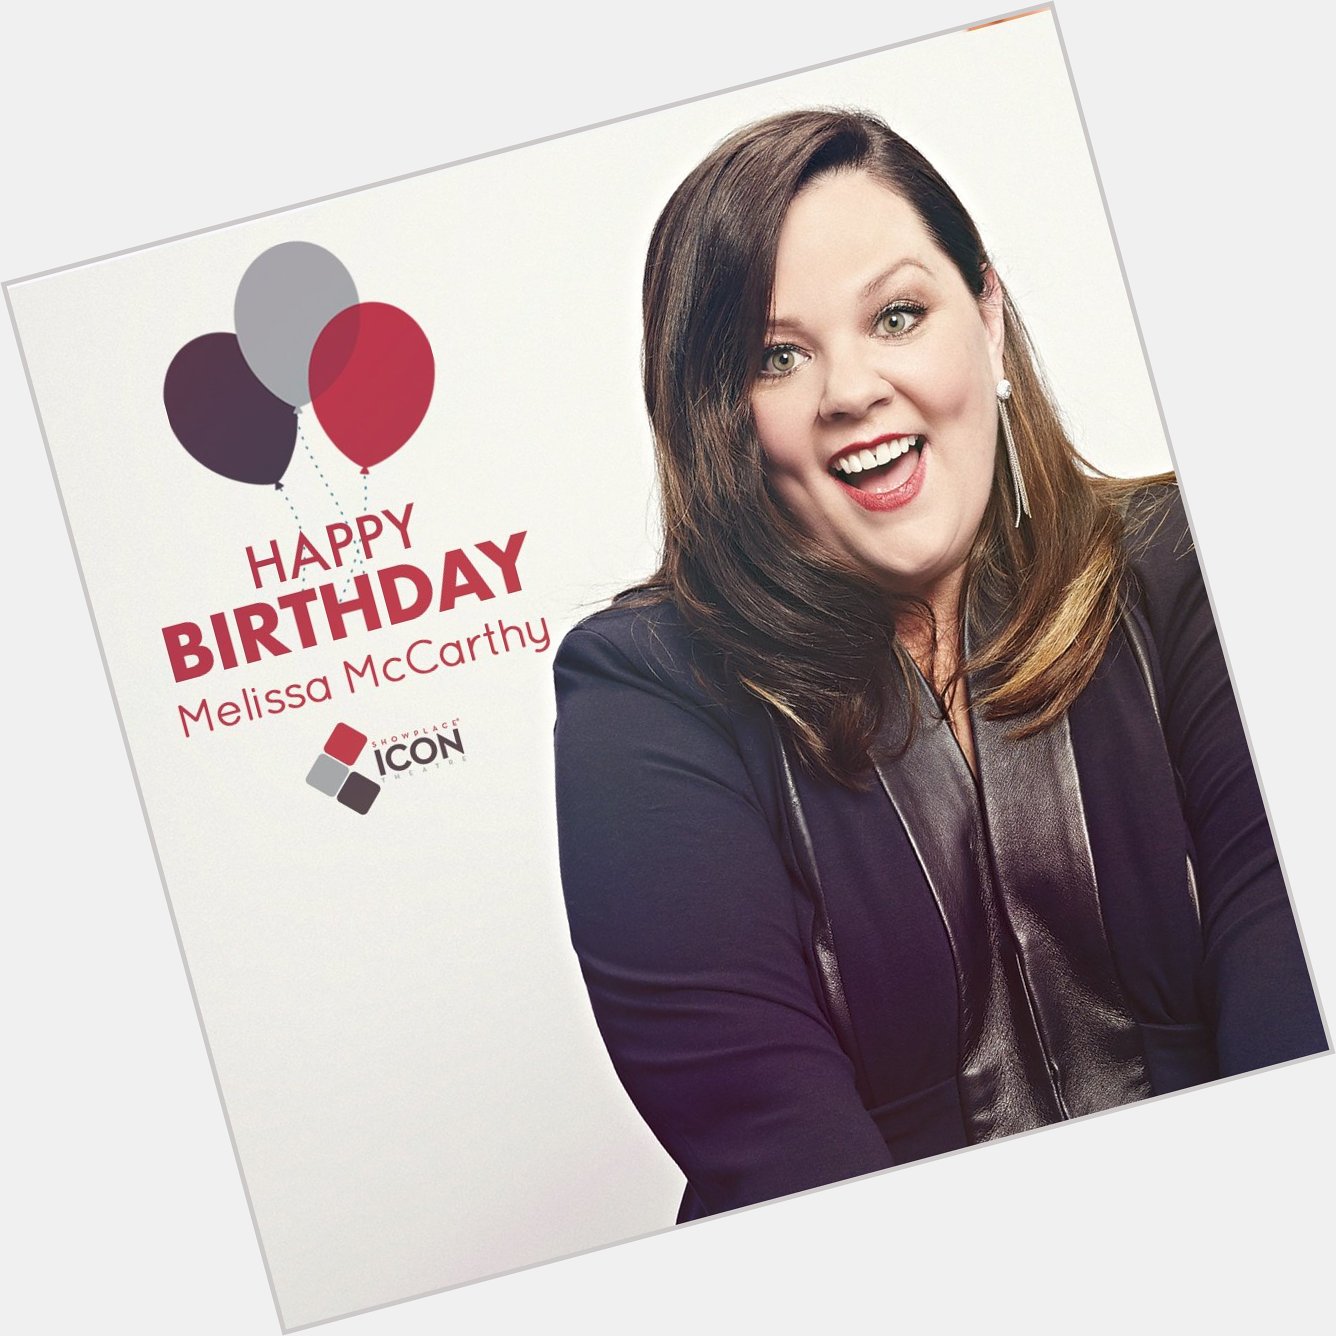 We are co-signing her for Ursula! Happy birthday, Melissa McCarthy. Visit:  